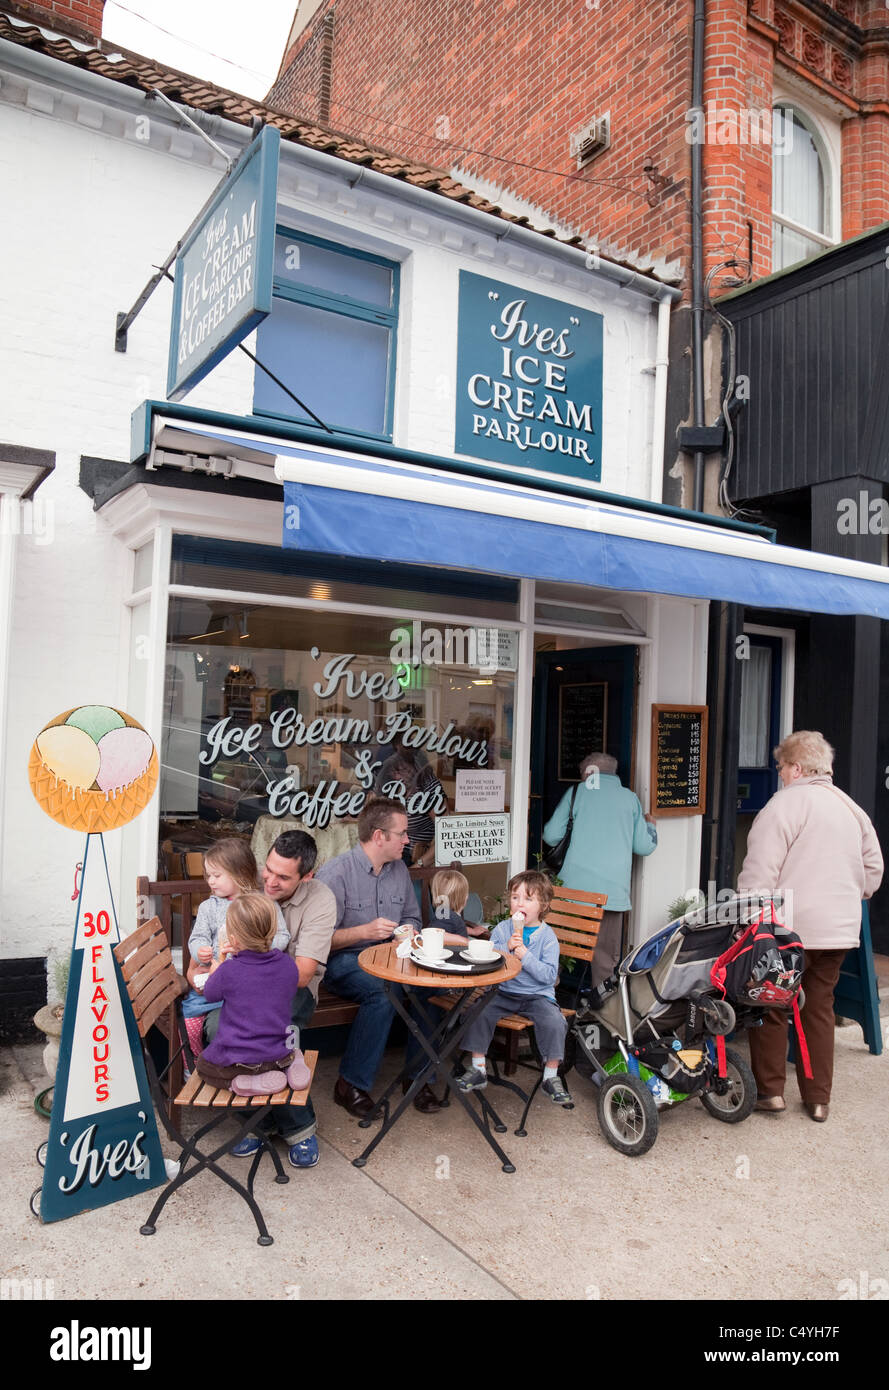 People having ice cream at the 'Ives' Ice Cream parlour, High St, Aldeburgh Suffolk UK Stock Photo